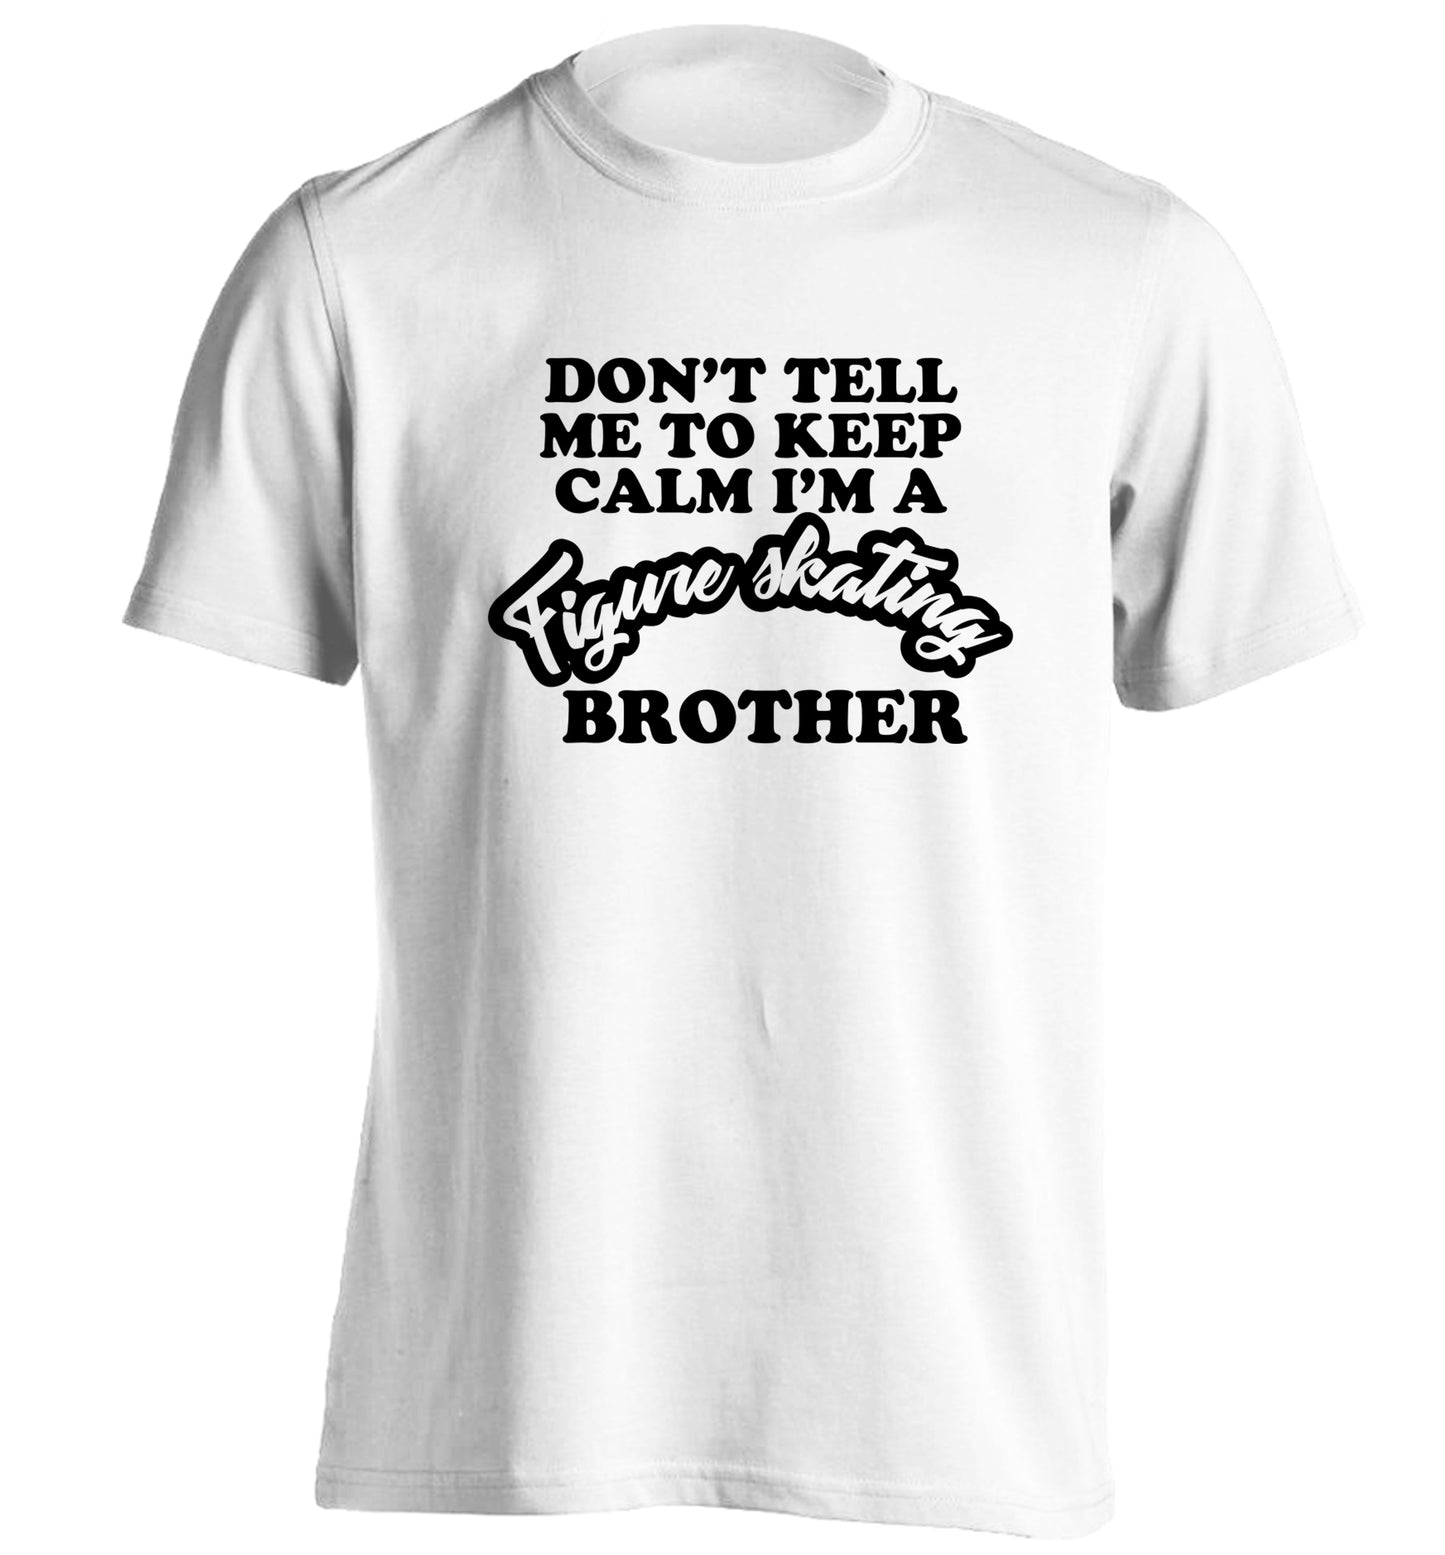 Don't tell me to keep calm I'm a figure skating brother adults unisexwhite Tshirt 2XL